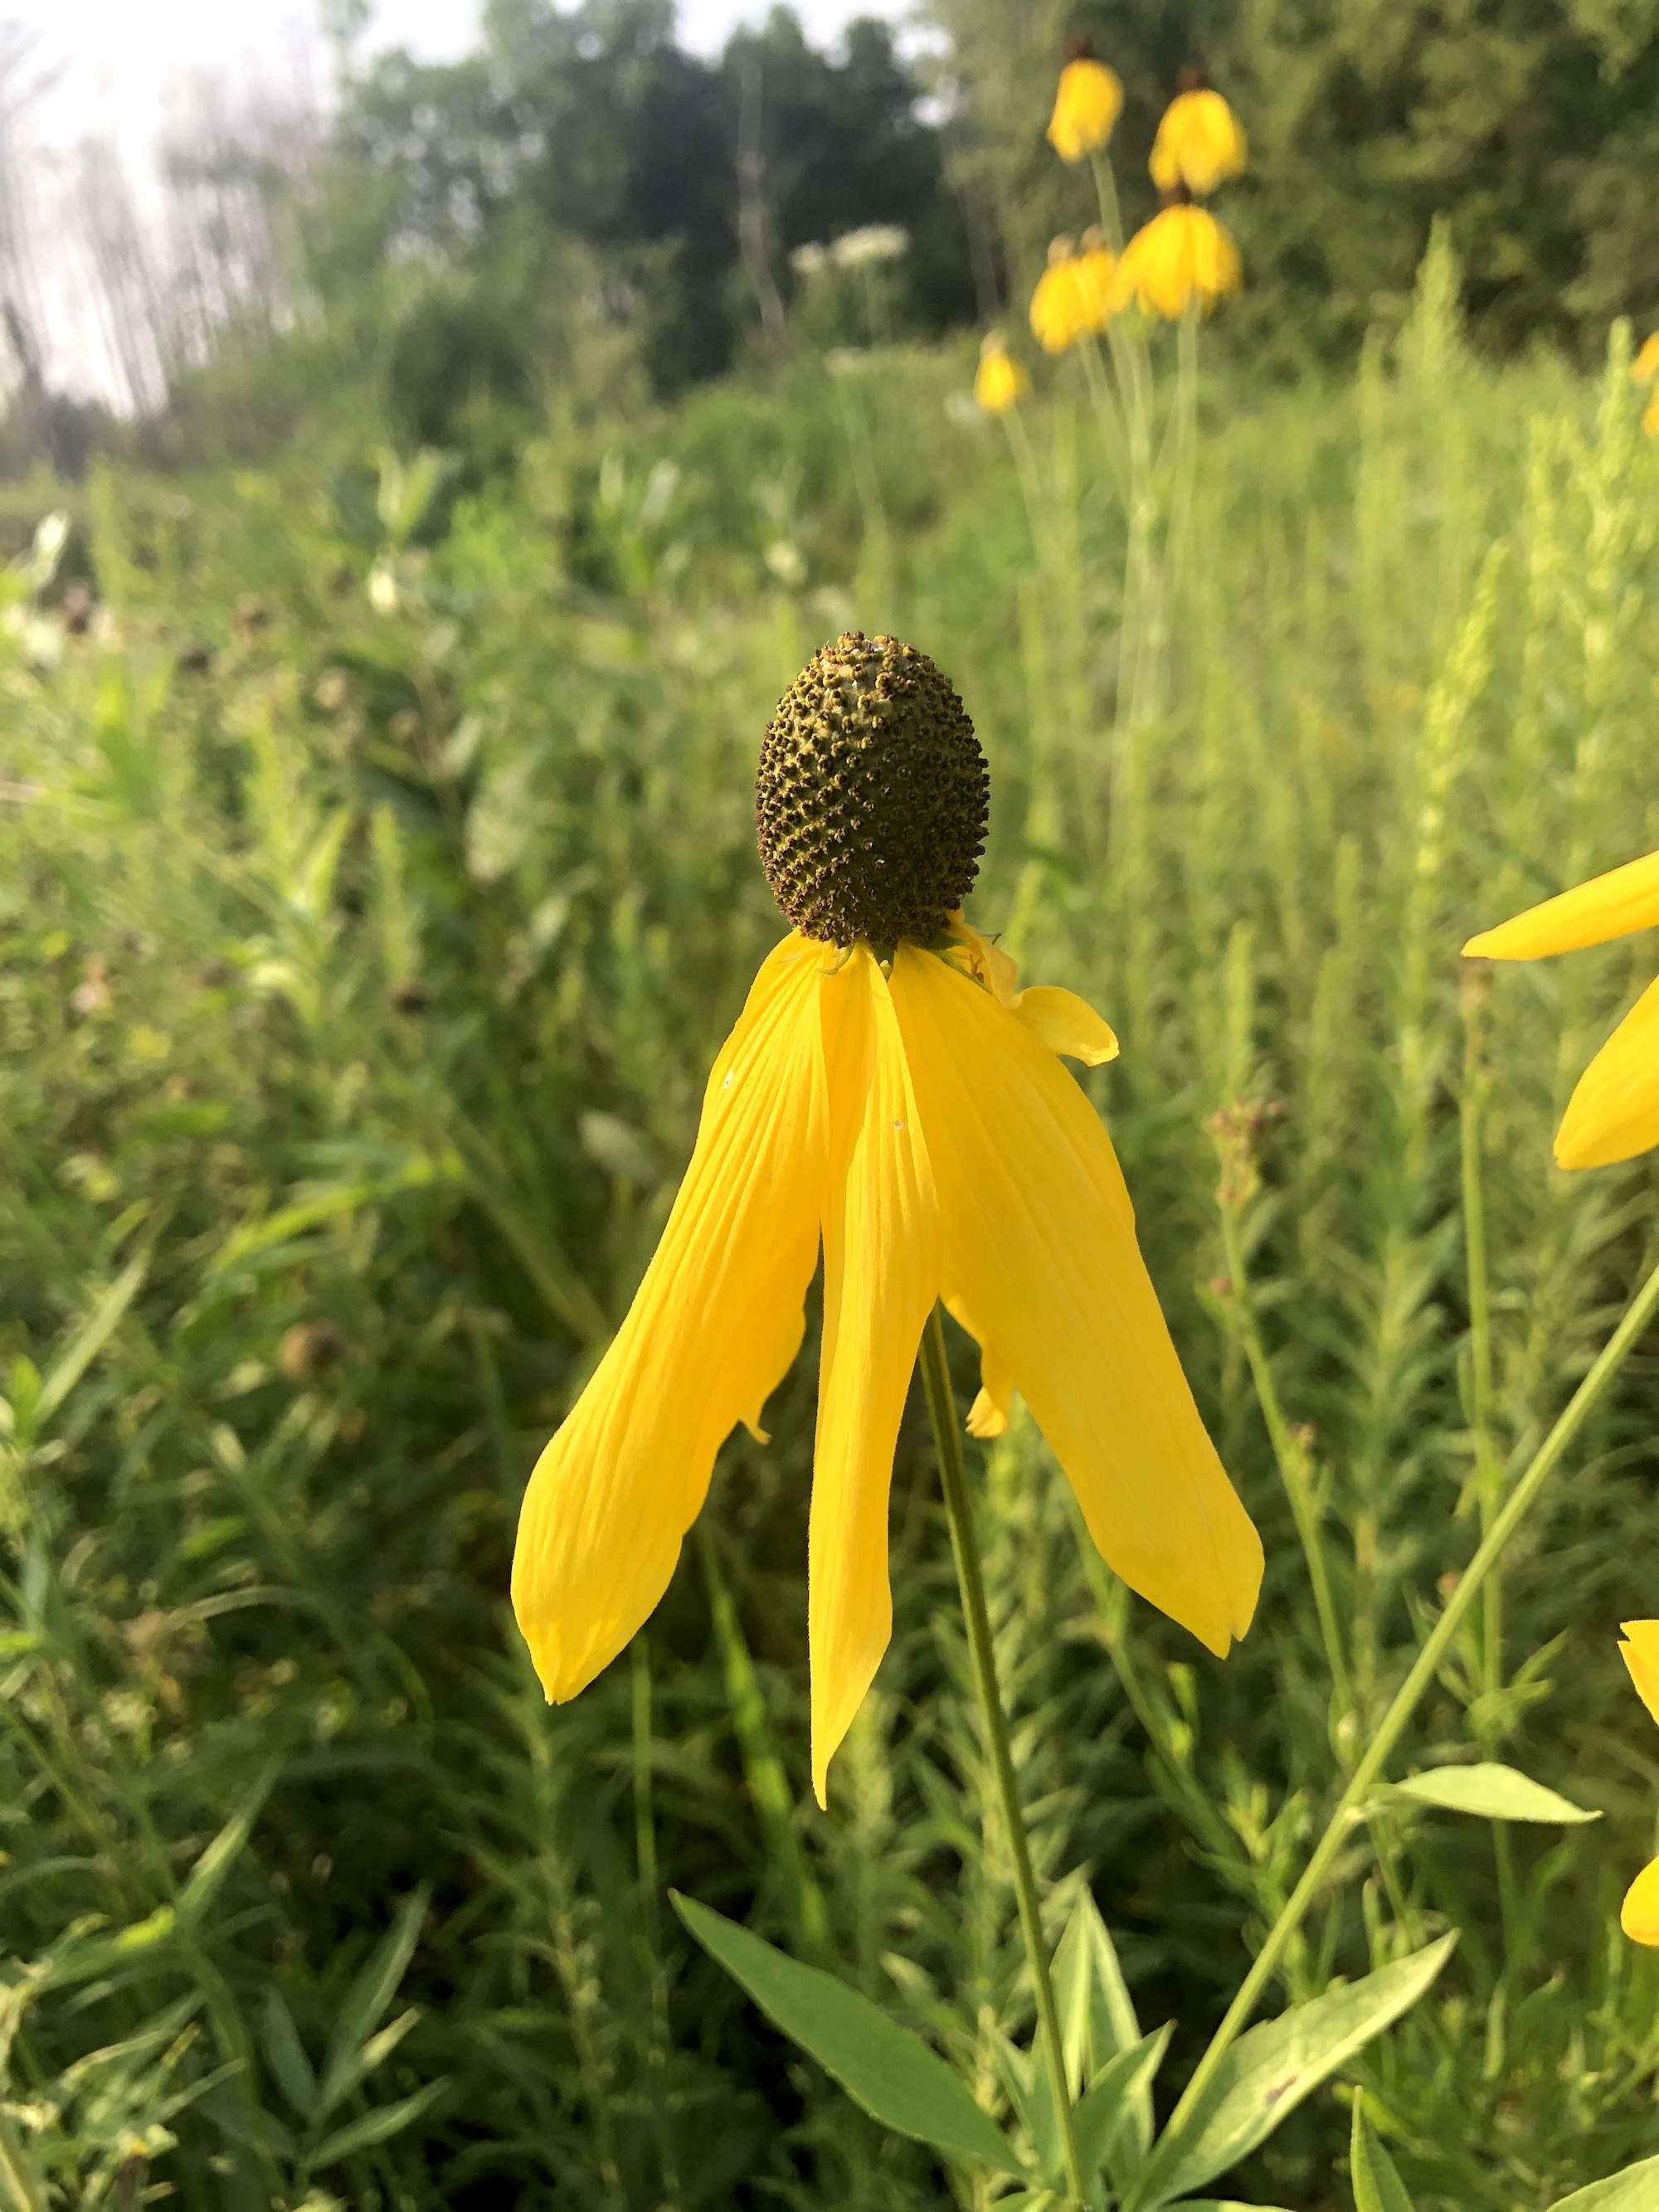 Gray-headed coneflower on shore of Marion Dunn Pond in Madison, Wisconsin on August 1, 2021.